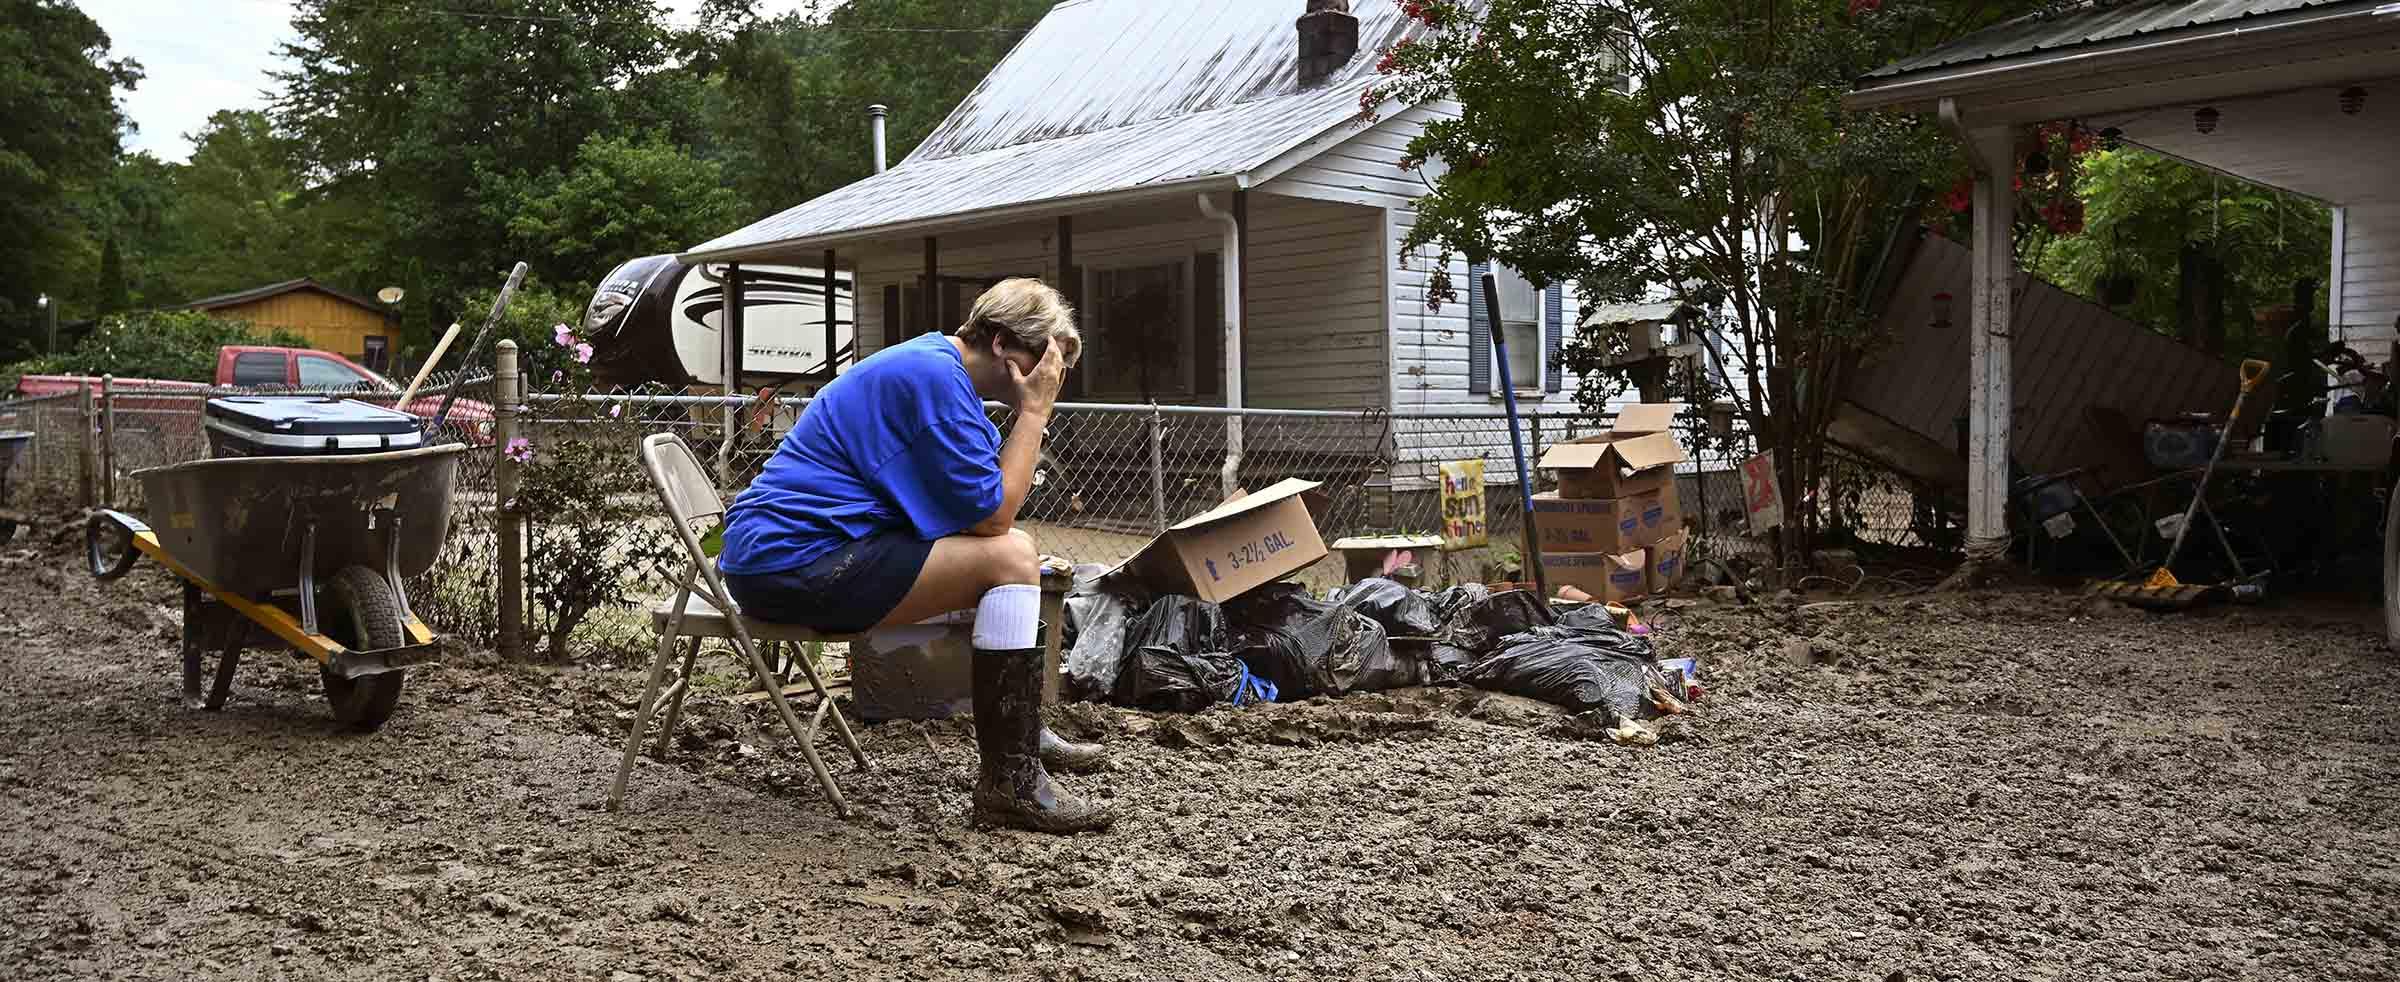 Teresa Reynolds sits exhausted as members of her community clean the debris from their flooded homes in Ogden Hollar in Hindman, Ky., Saturday, July 30, 2022, after record rains struck the area. (AP Photo by Timothy D. Easley)